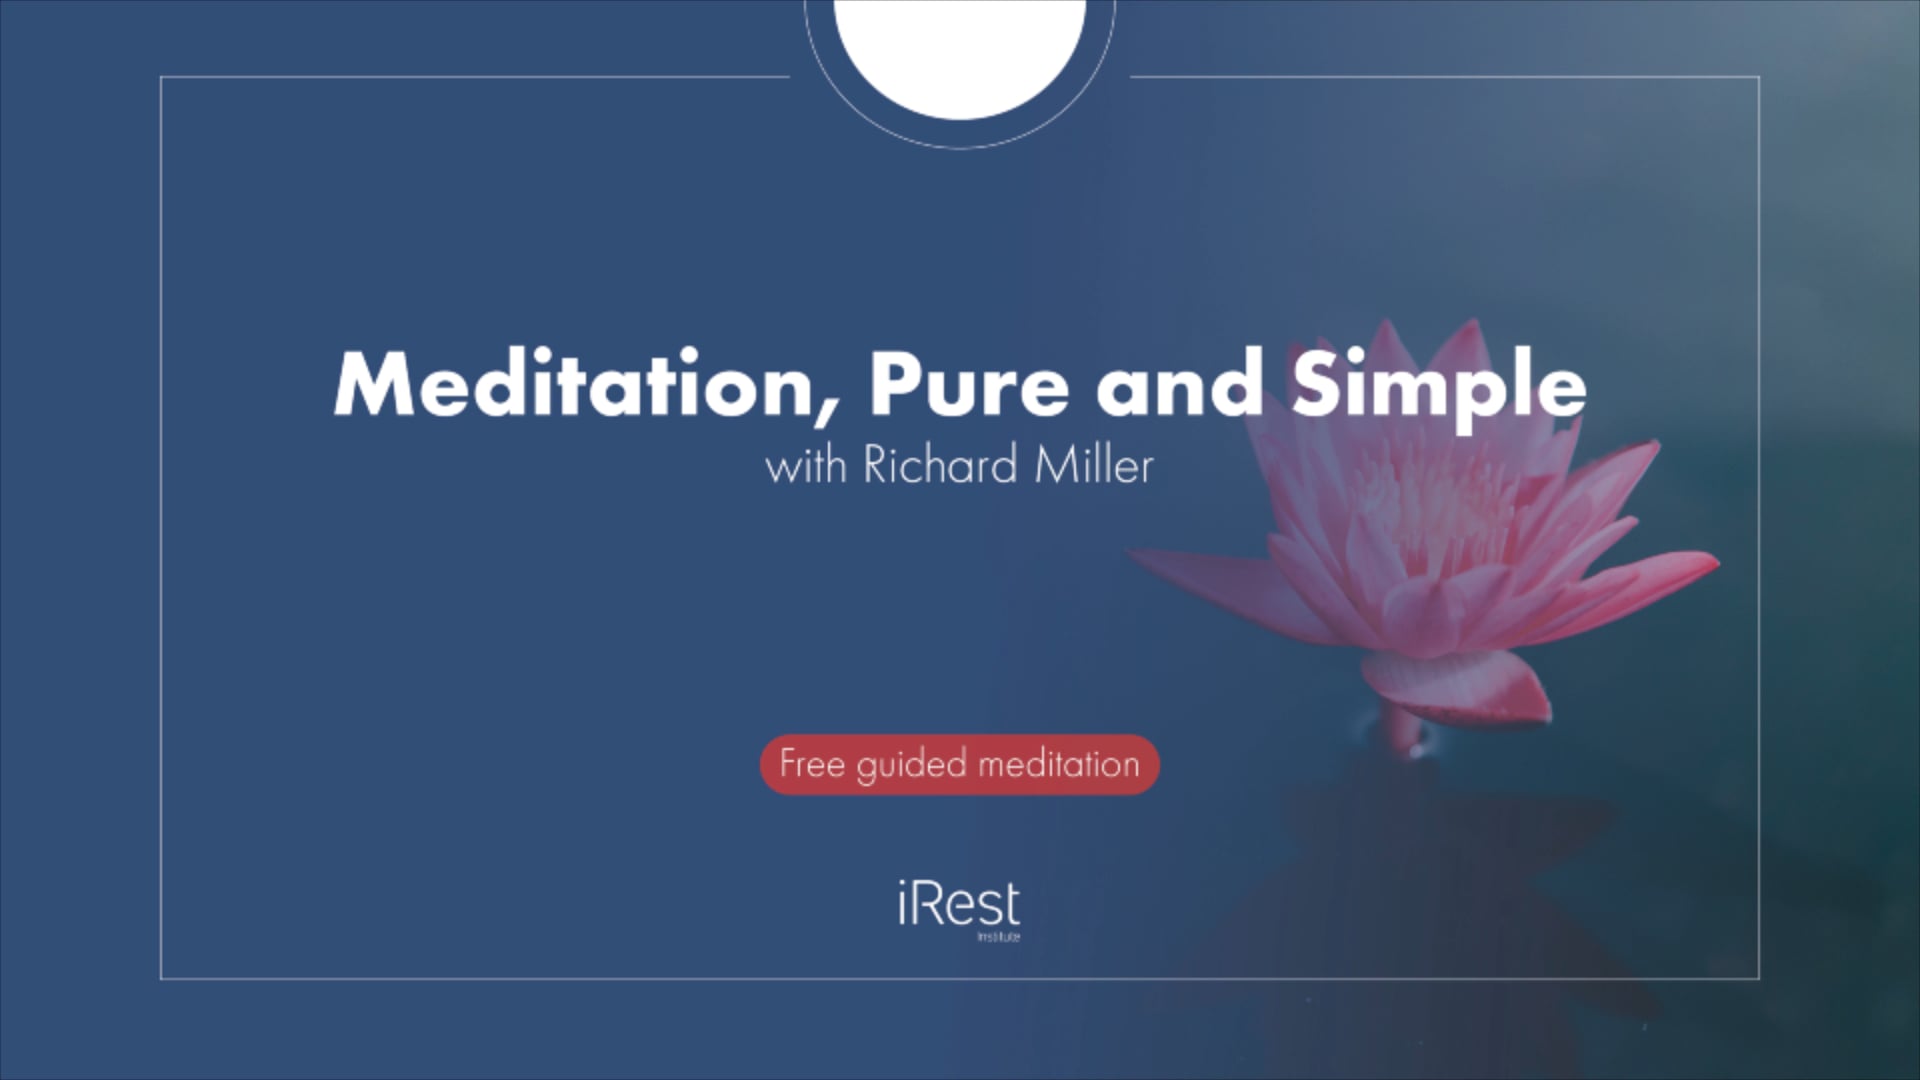 Meditation, Pure and Simple with Richard Miller